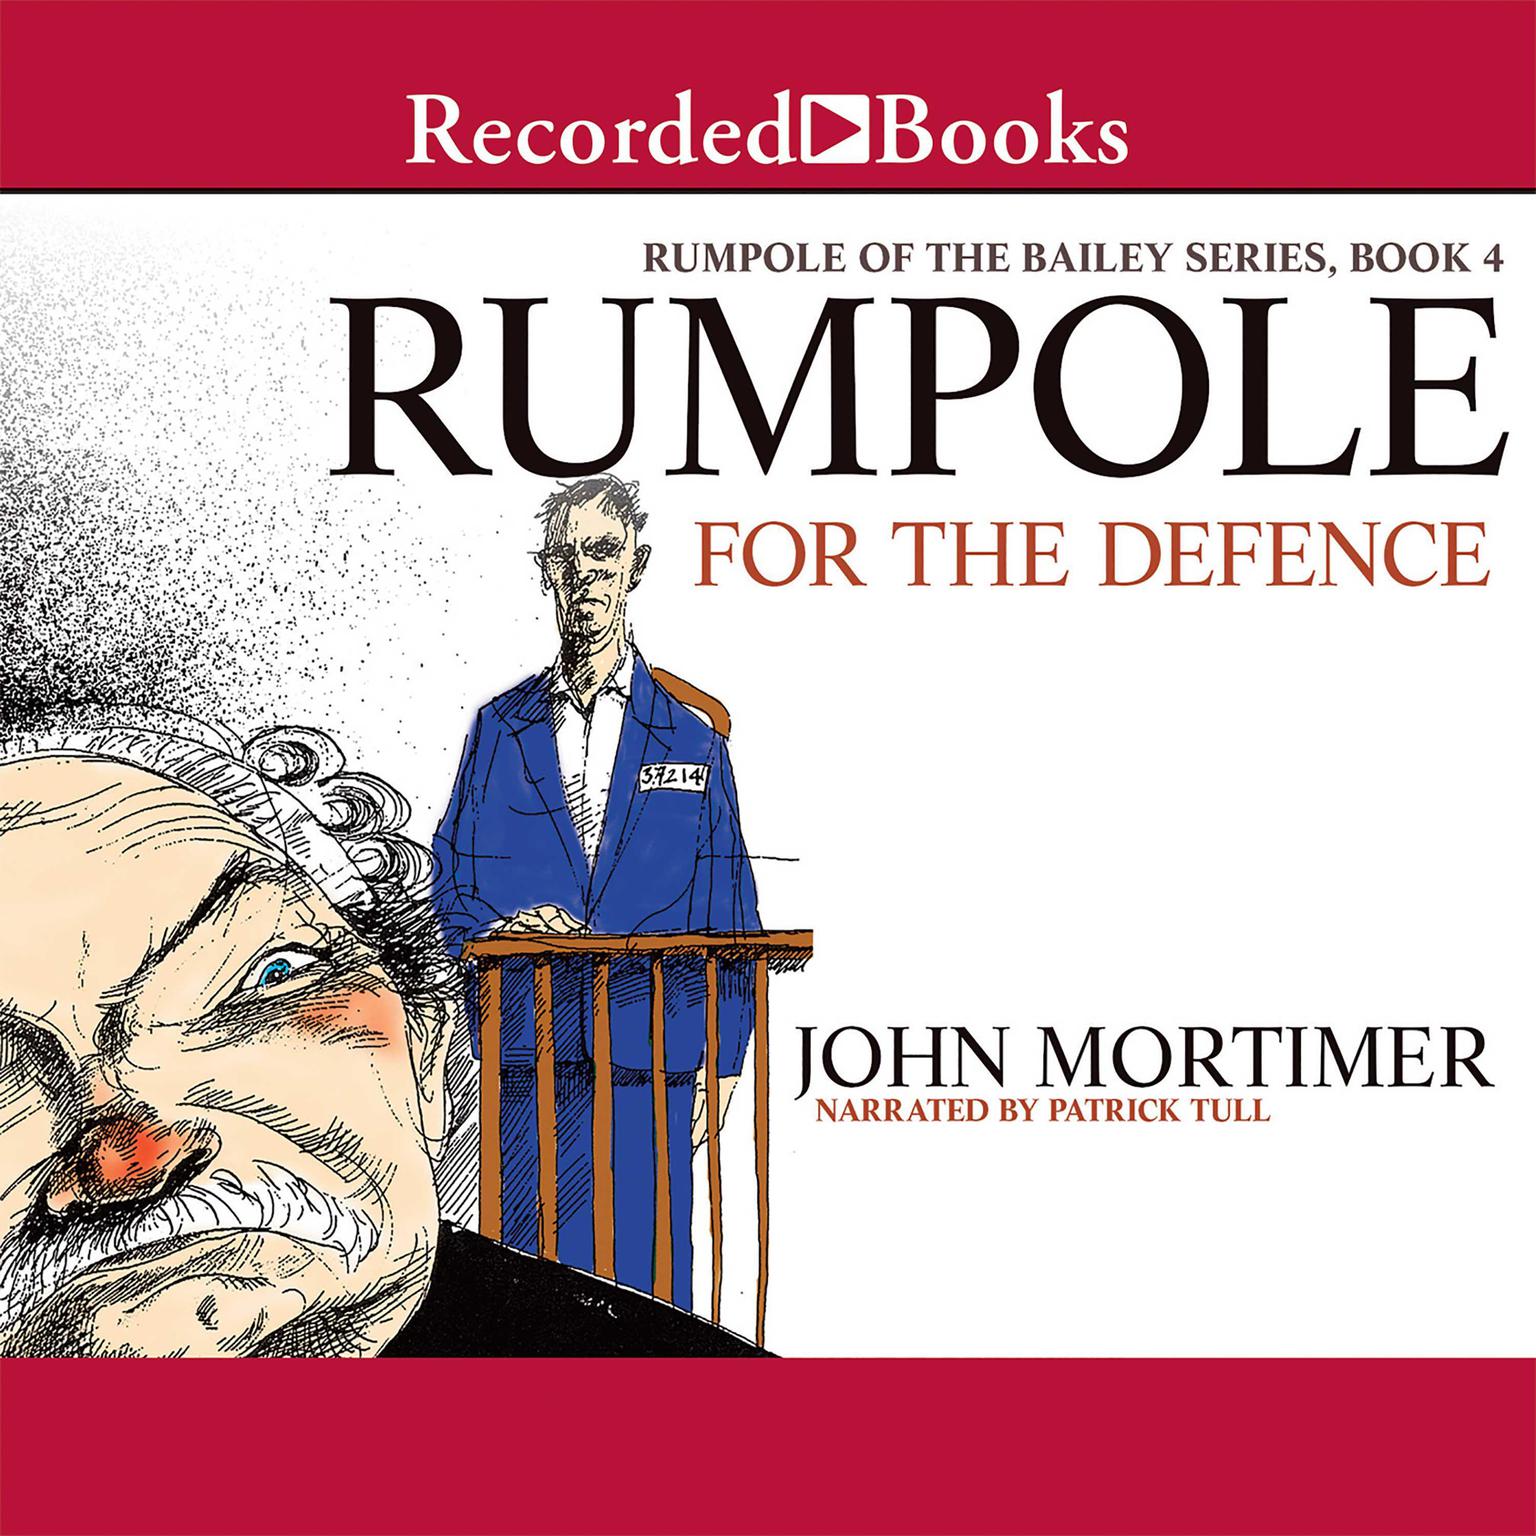 Rumpole for the Defence Audiobook, by John Mortimer